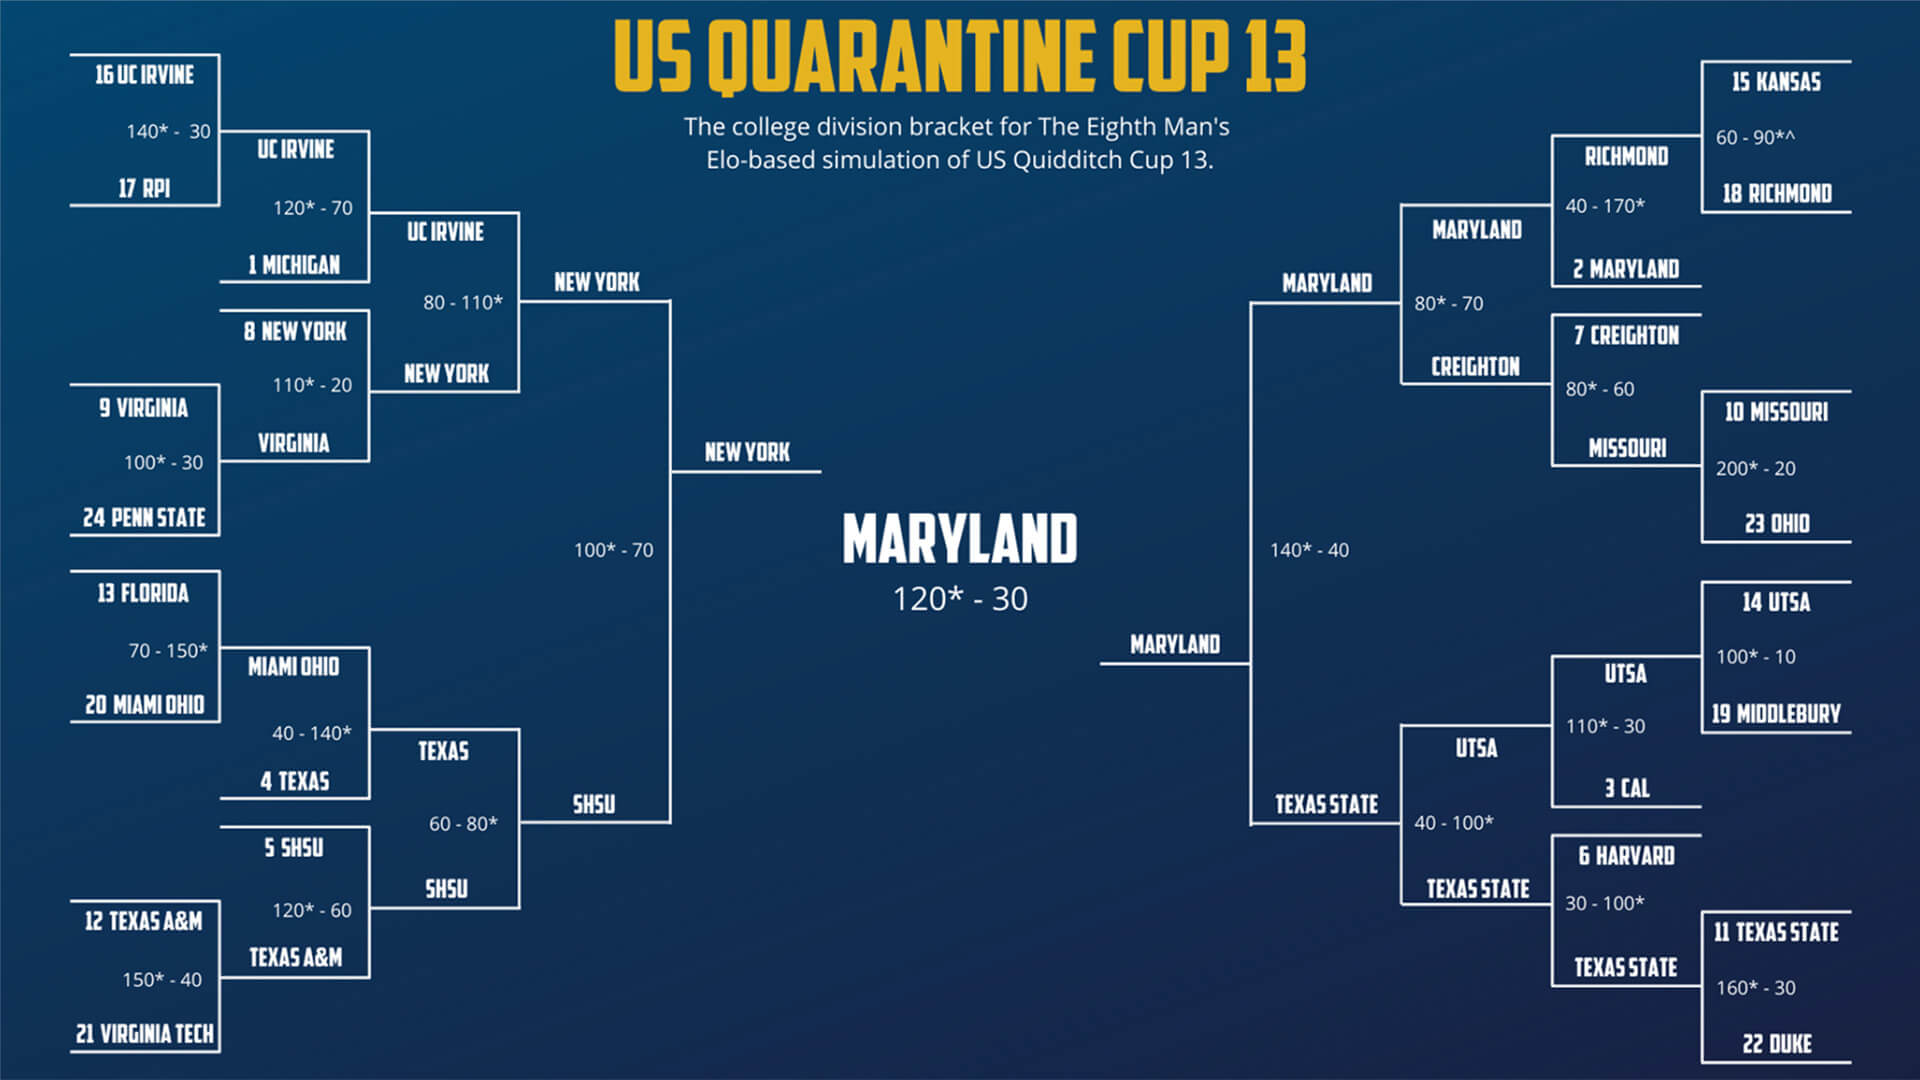 US Quarantine Cup 13: The college division bracket for The Eighth Man's Elo-based simulation of US Quidditch Cup 13. Maryland defeats New York, 120-30